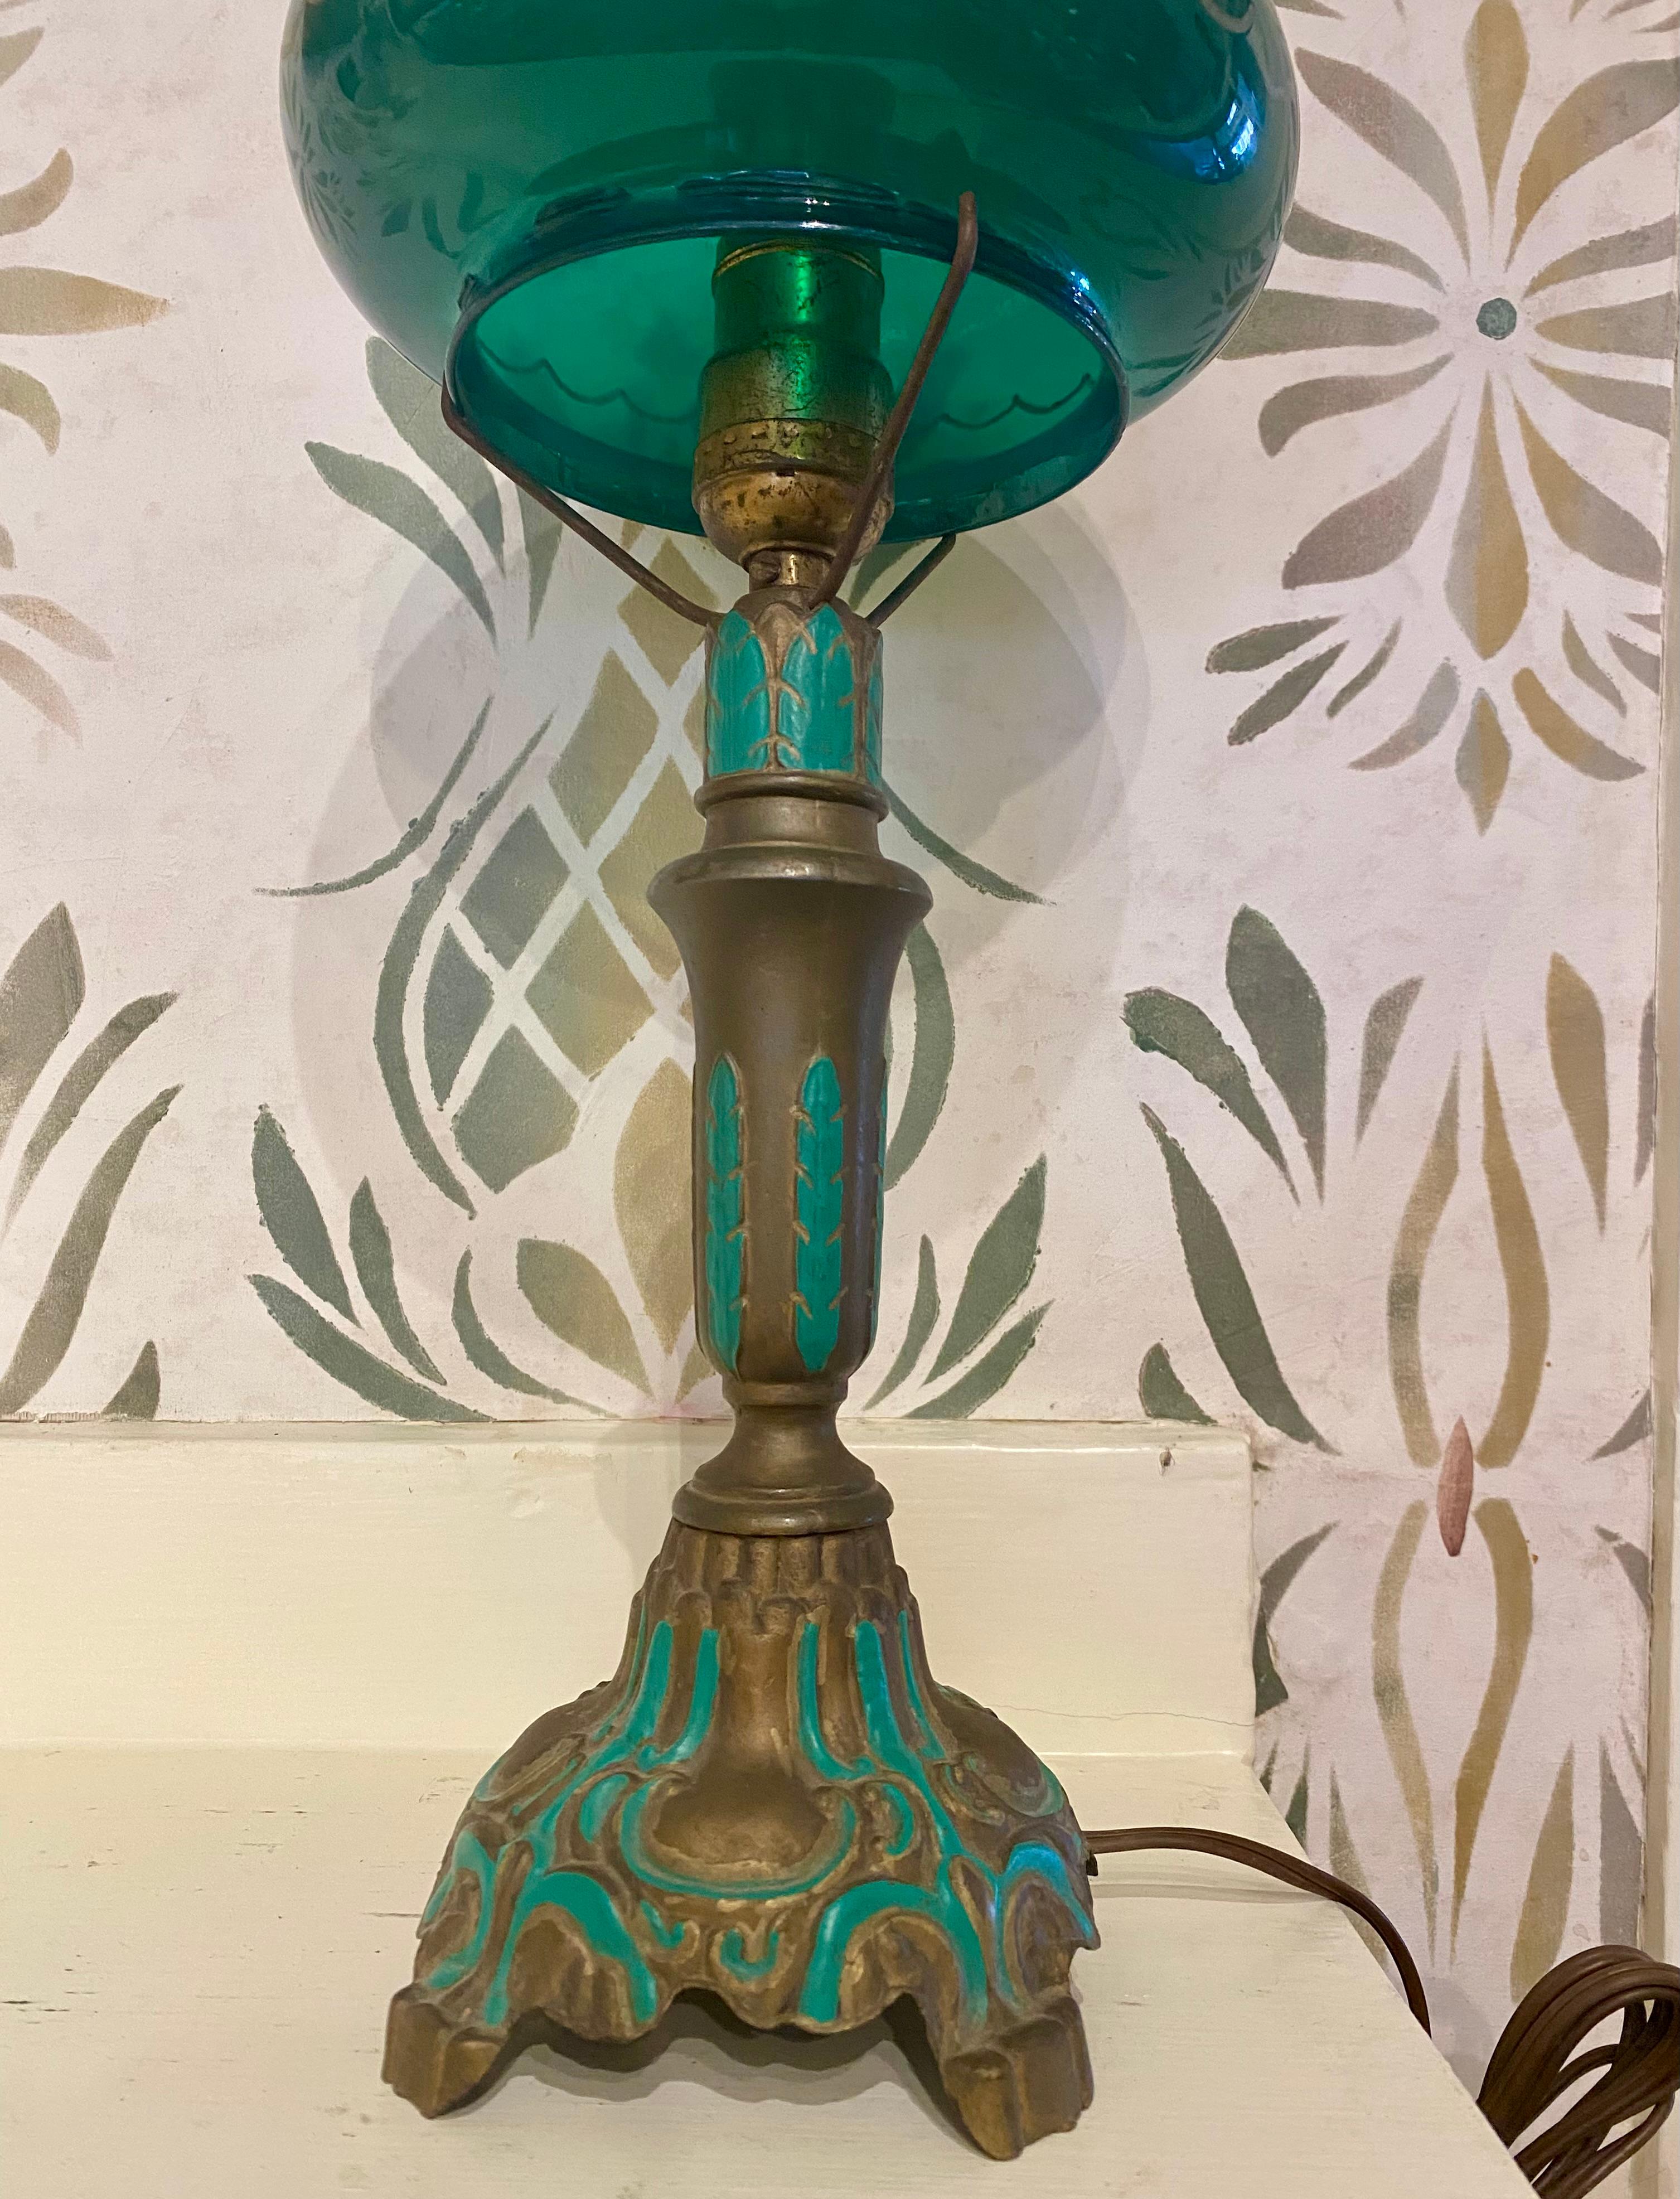 Art Deco Bronze Patinated Lamp with Emeralite Glass Shade, circa 1920, having a flattened spheroid 